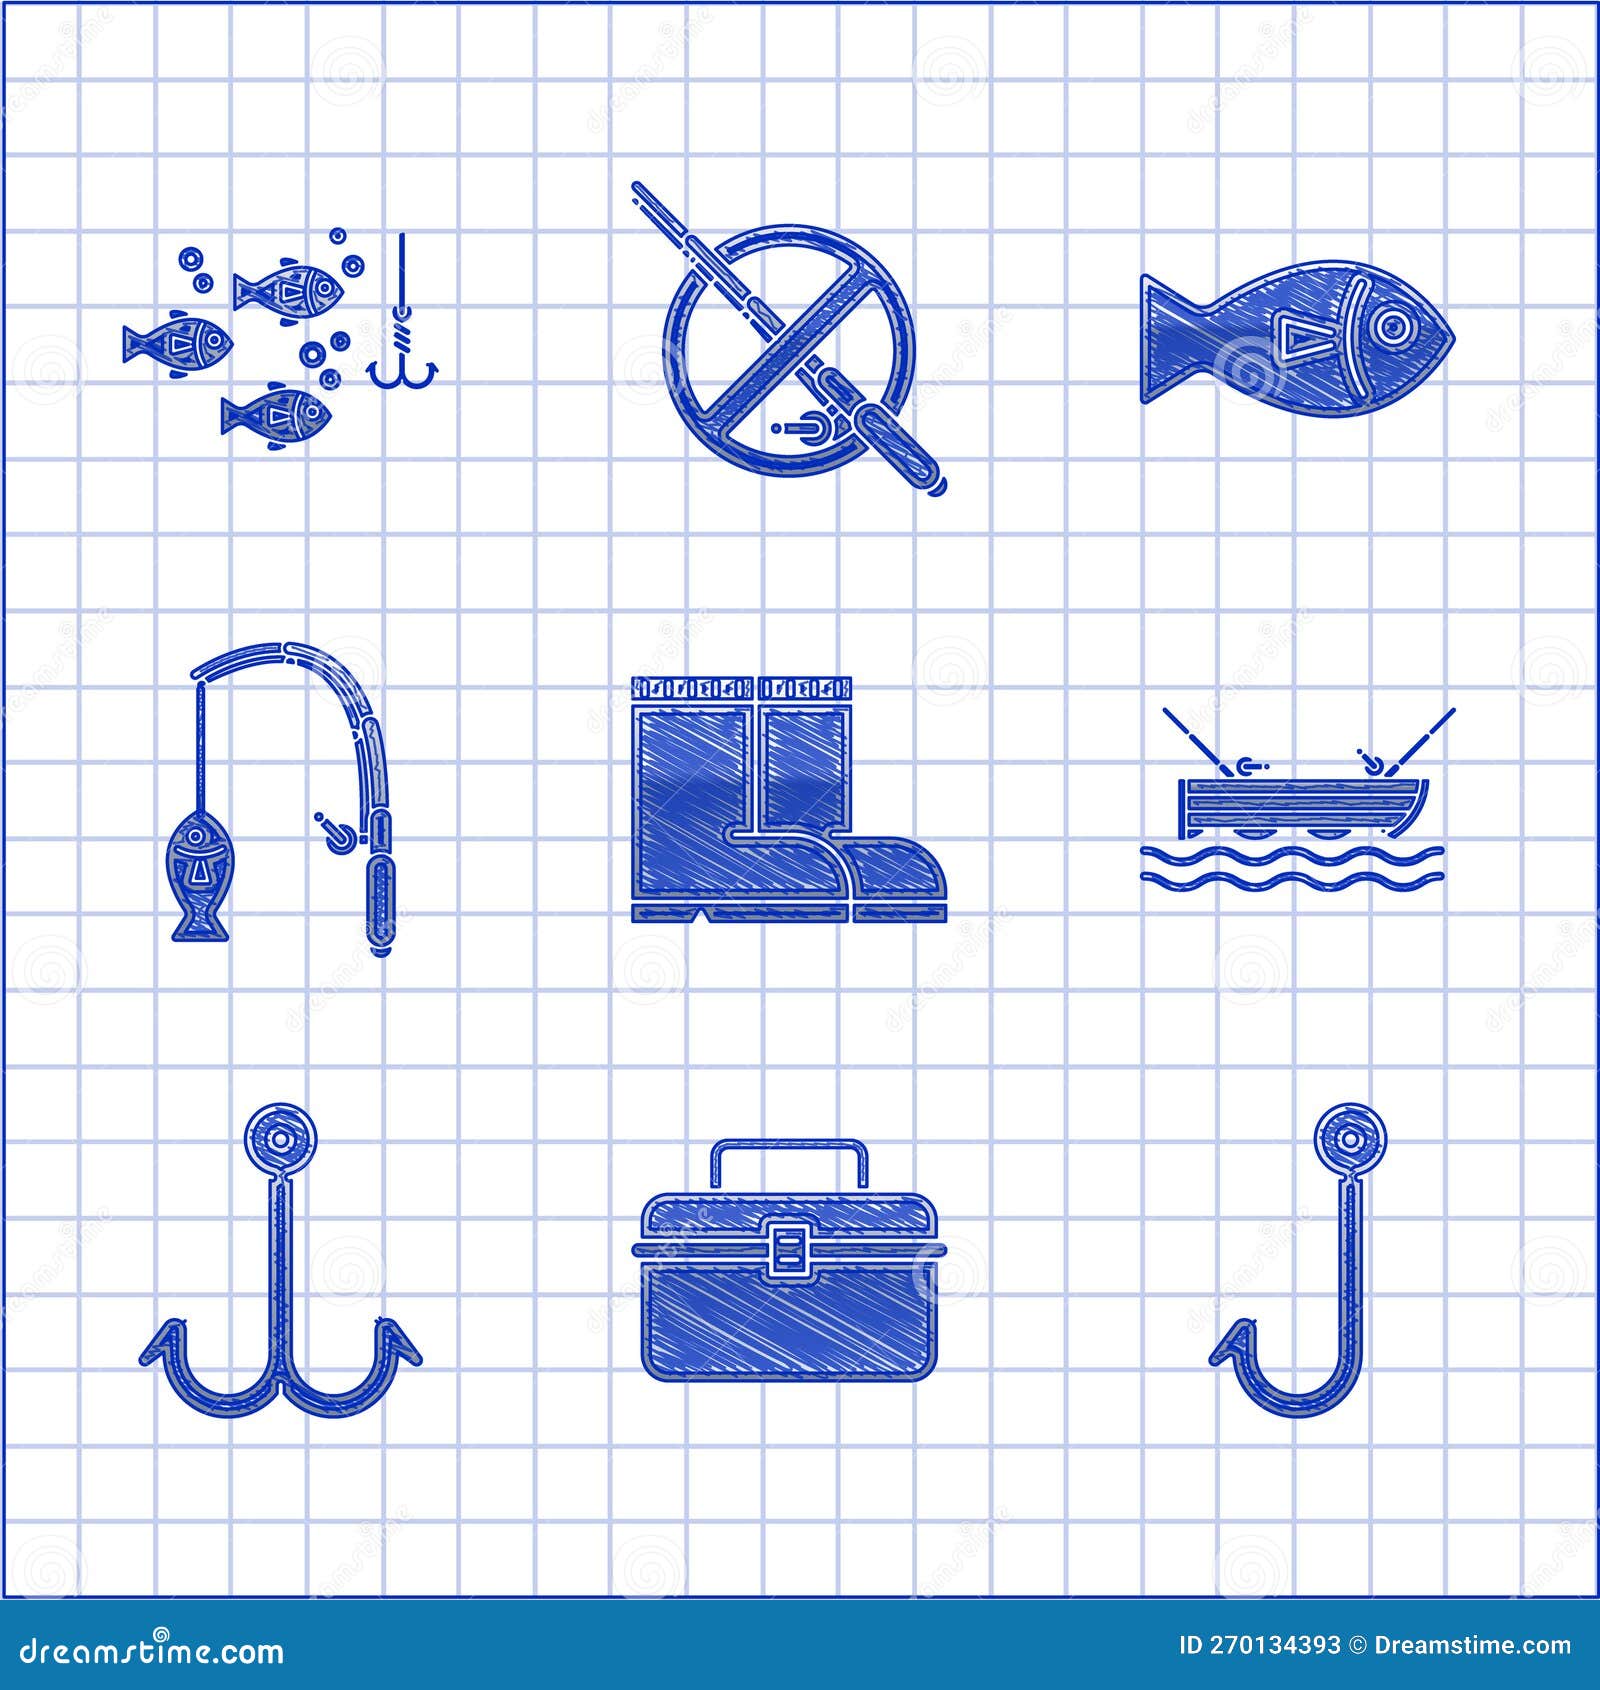 https://thumbs.dreamstime.com/z/set-fishing-boots-case-box-container-wobbler-gear-equipment-hook-boat-rod-water-under-icon-vector-270134393.jpg